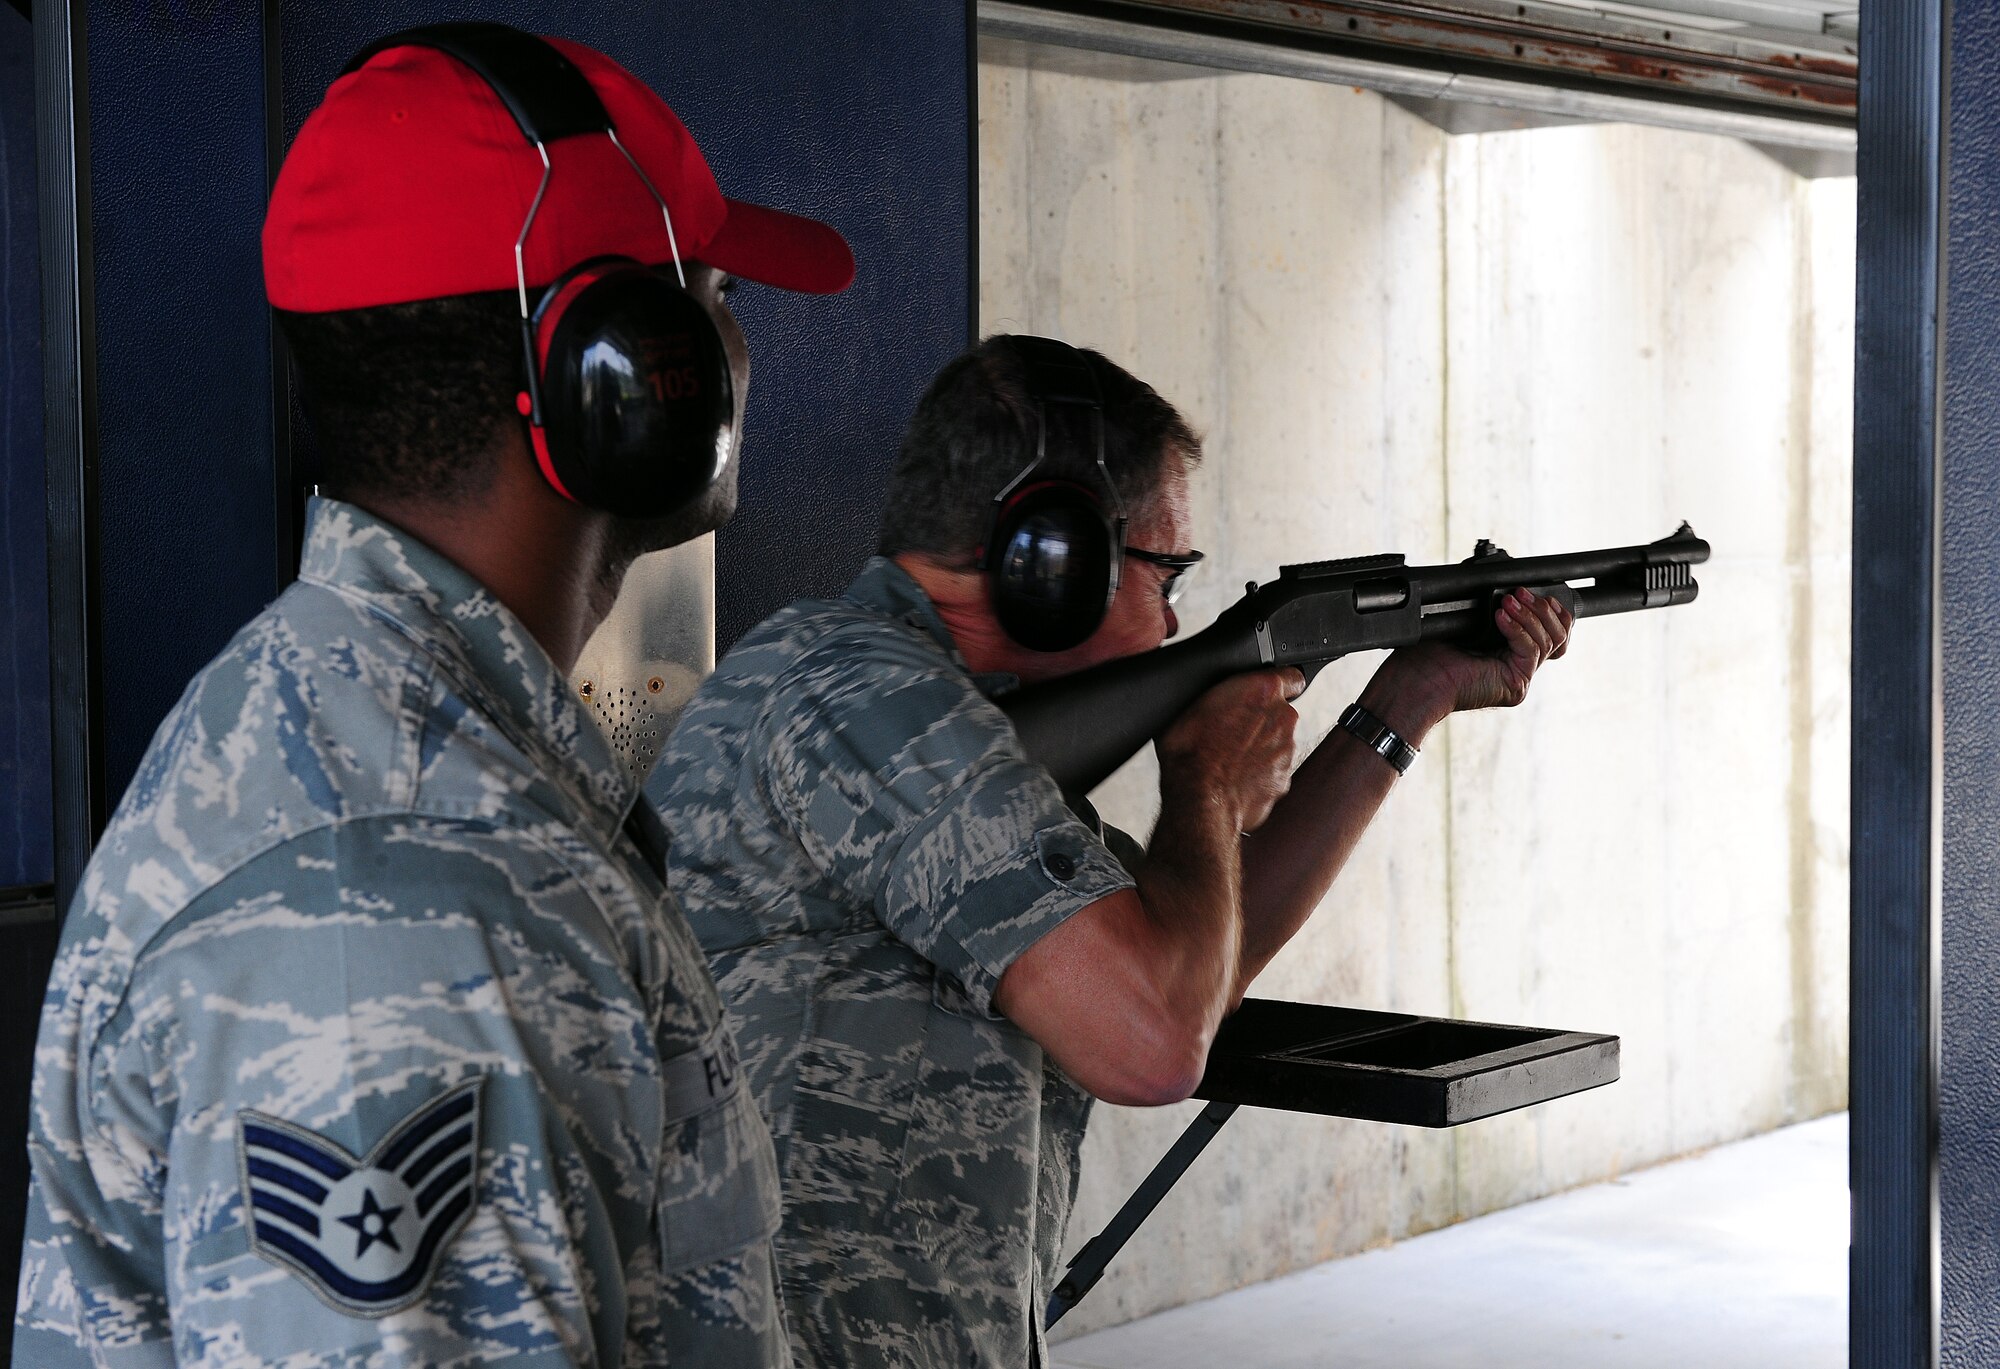 100616-F-6838W-059
SHAW AIR FORCE BASE, S.C.--Gen. William M. Fraser, Air Combat commander, shoots the M870 shotgun used for training at Combat Arms Training and Marksmanship range here June 16, 2010. General Fraser and his wife visited Shaw to gain insight into the mission and speak with Airmen from units across the base to hear their concerns. (U.S. Air Force photo/Airman 1st Class Neil D. Warner)


